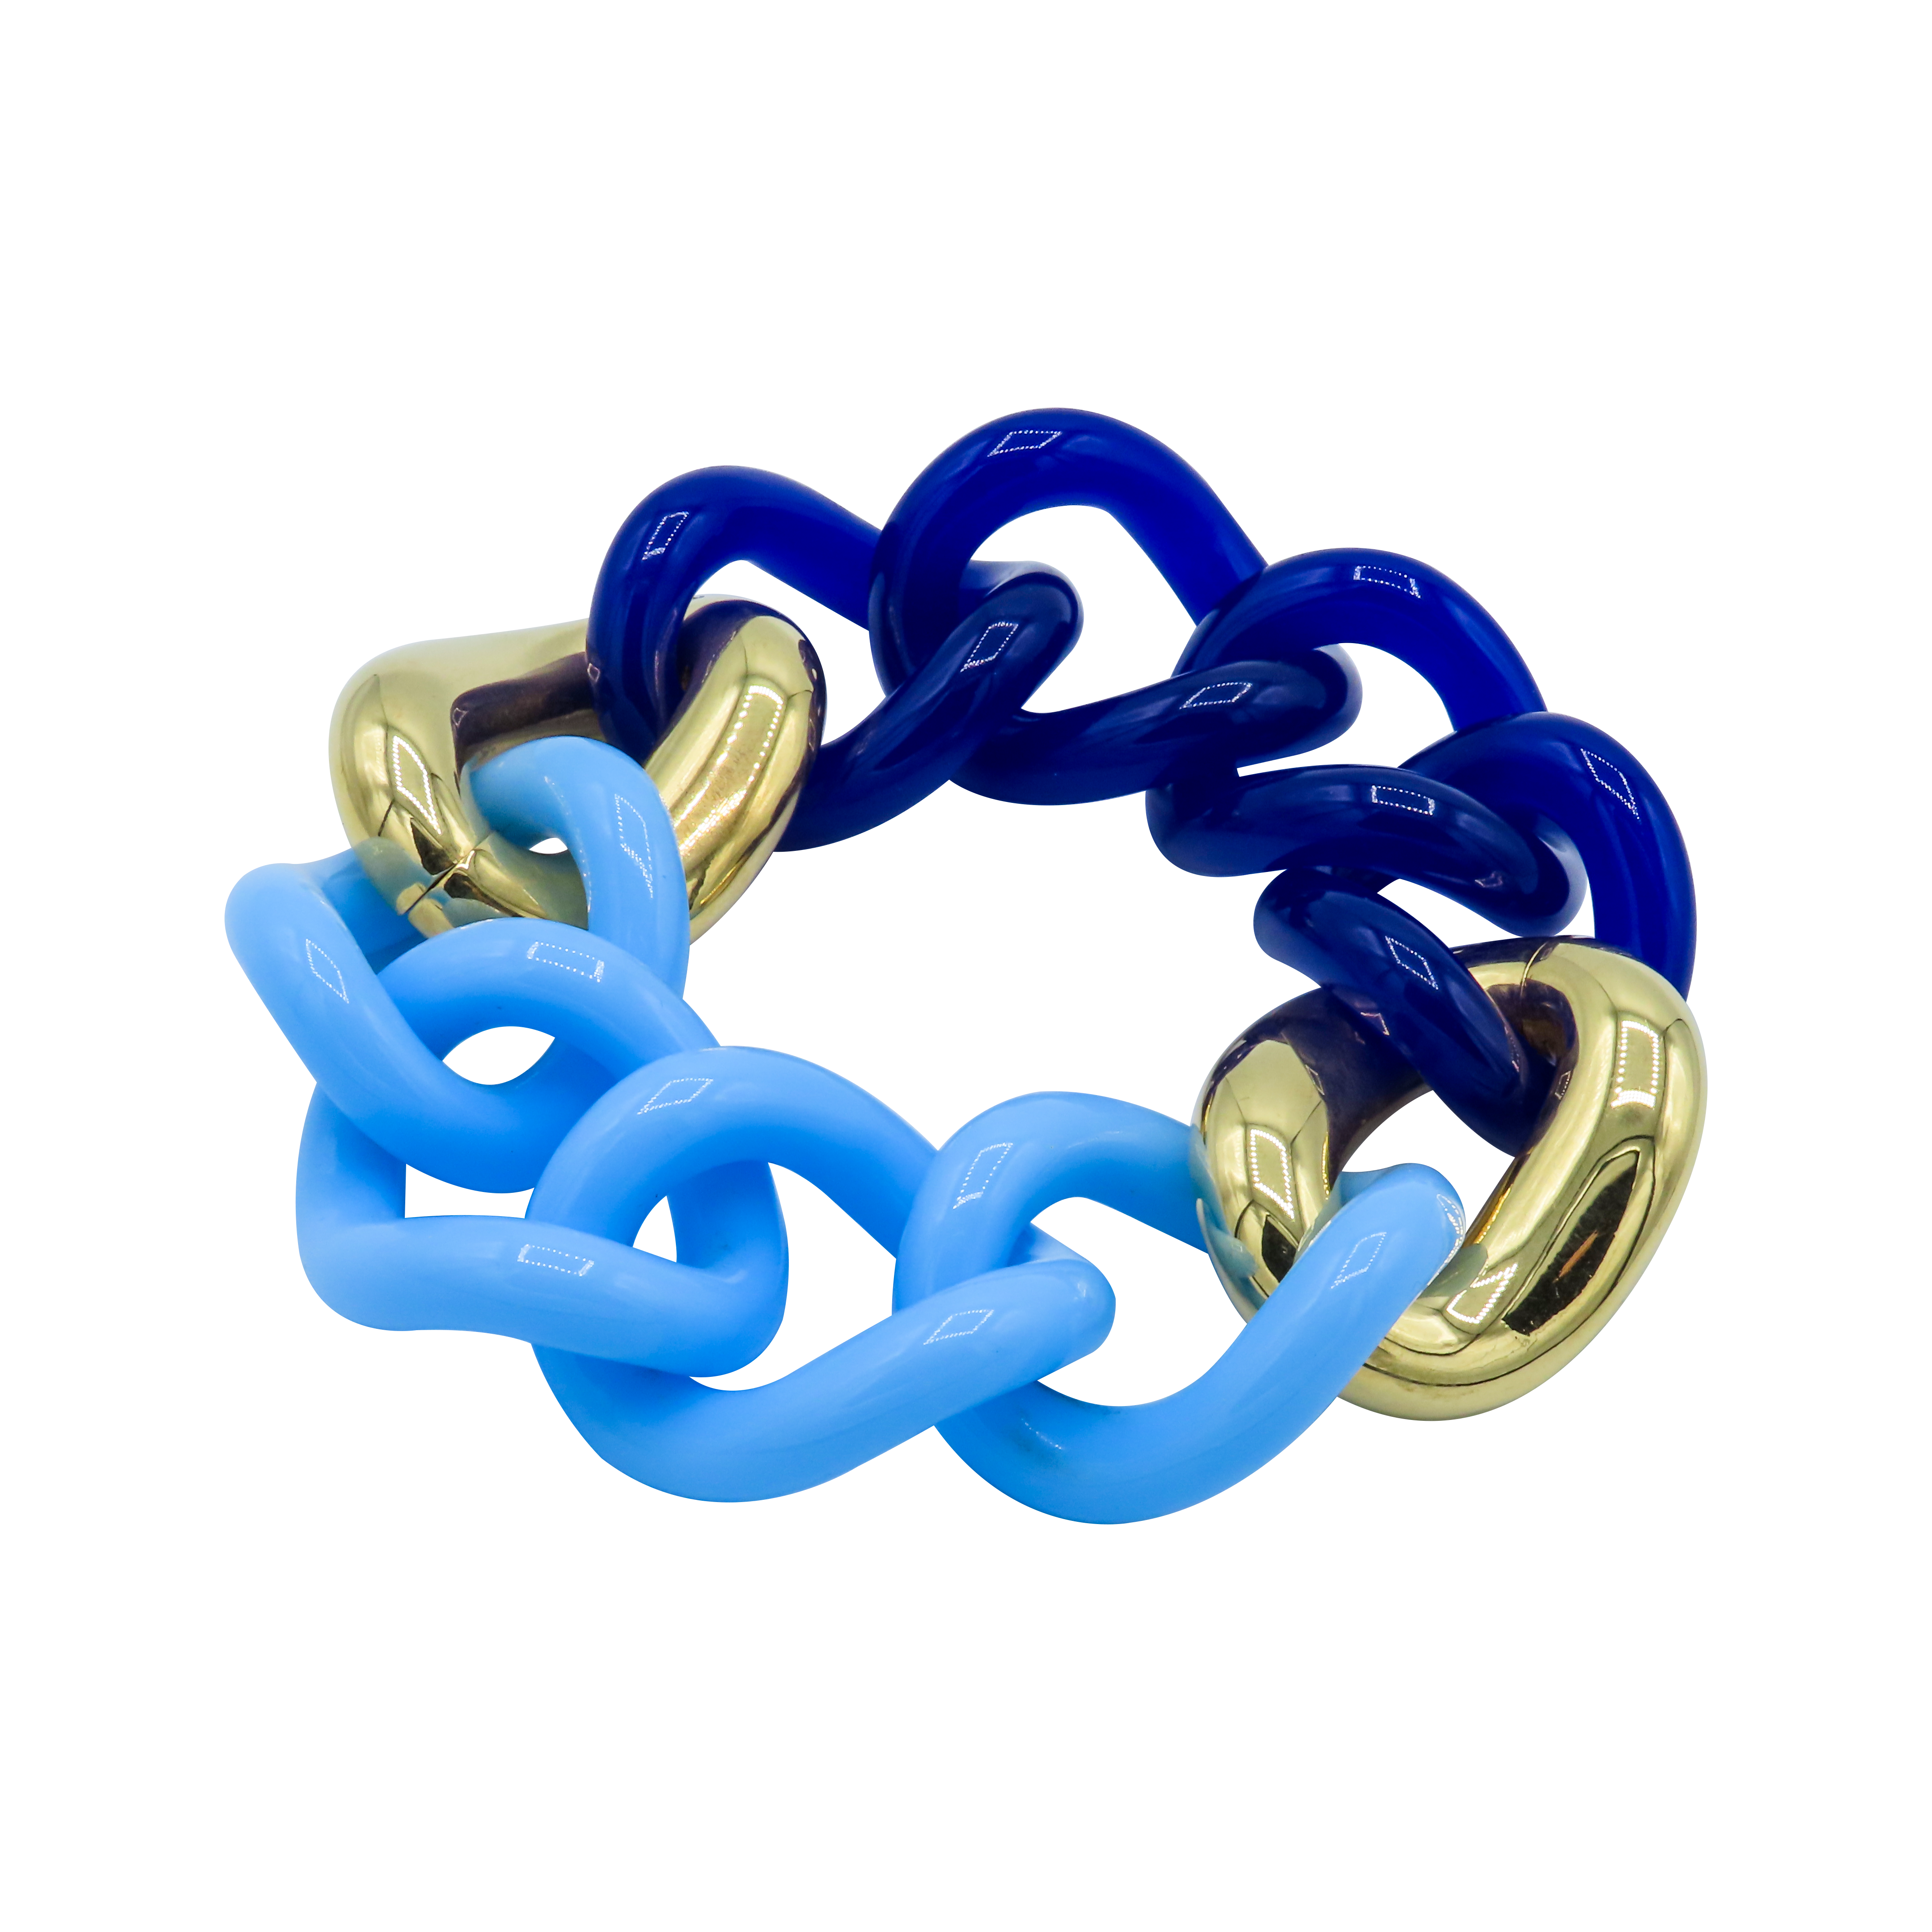 Composite - Baby Blue/Navy Blue - Gold plated